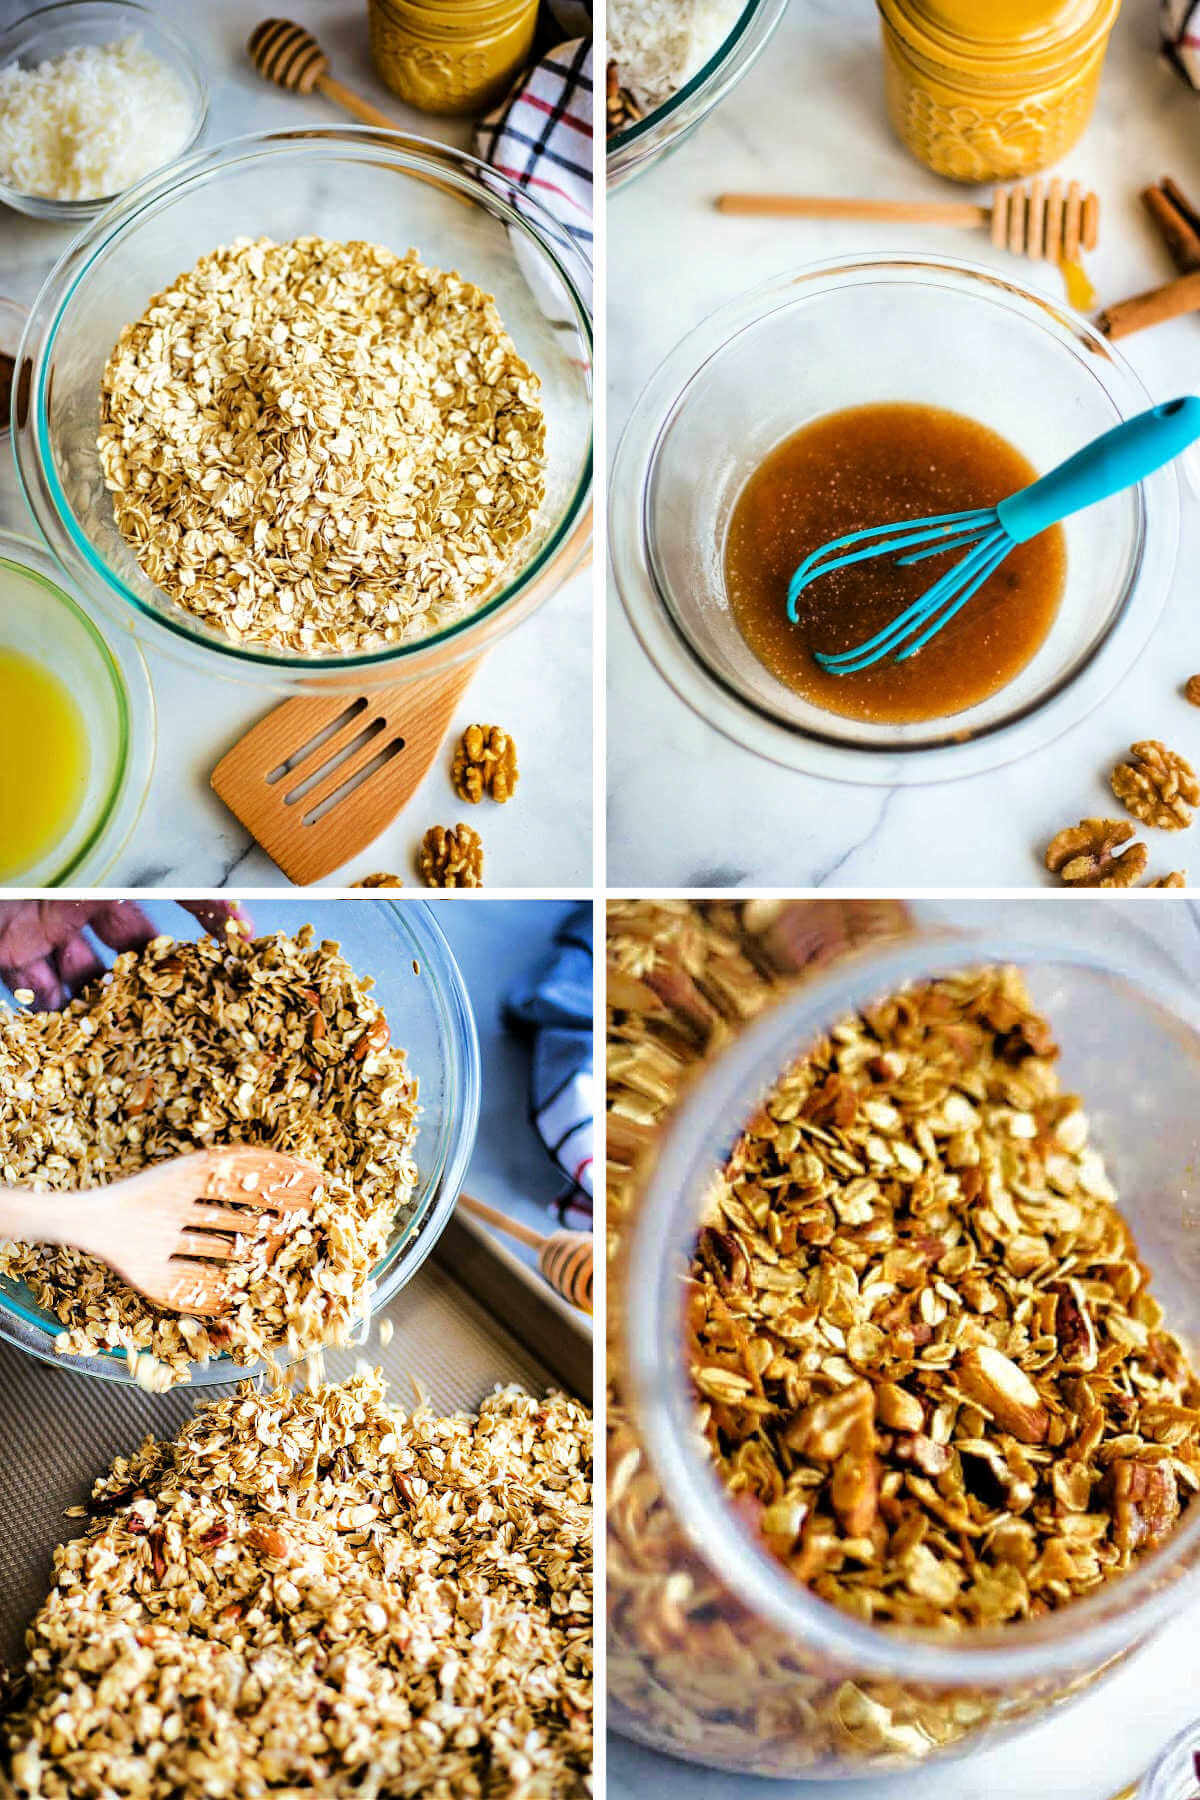 Process steps for making nut granola; stirring together melted butter, honey, and cinnamon; coating the granola and pouring onto a baking sheet.